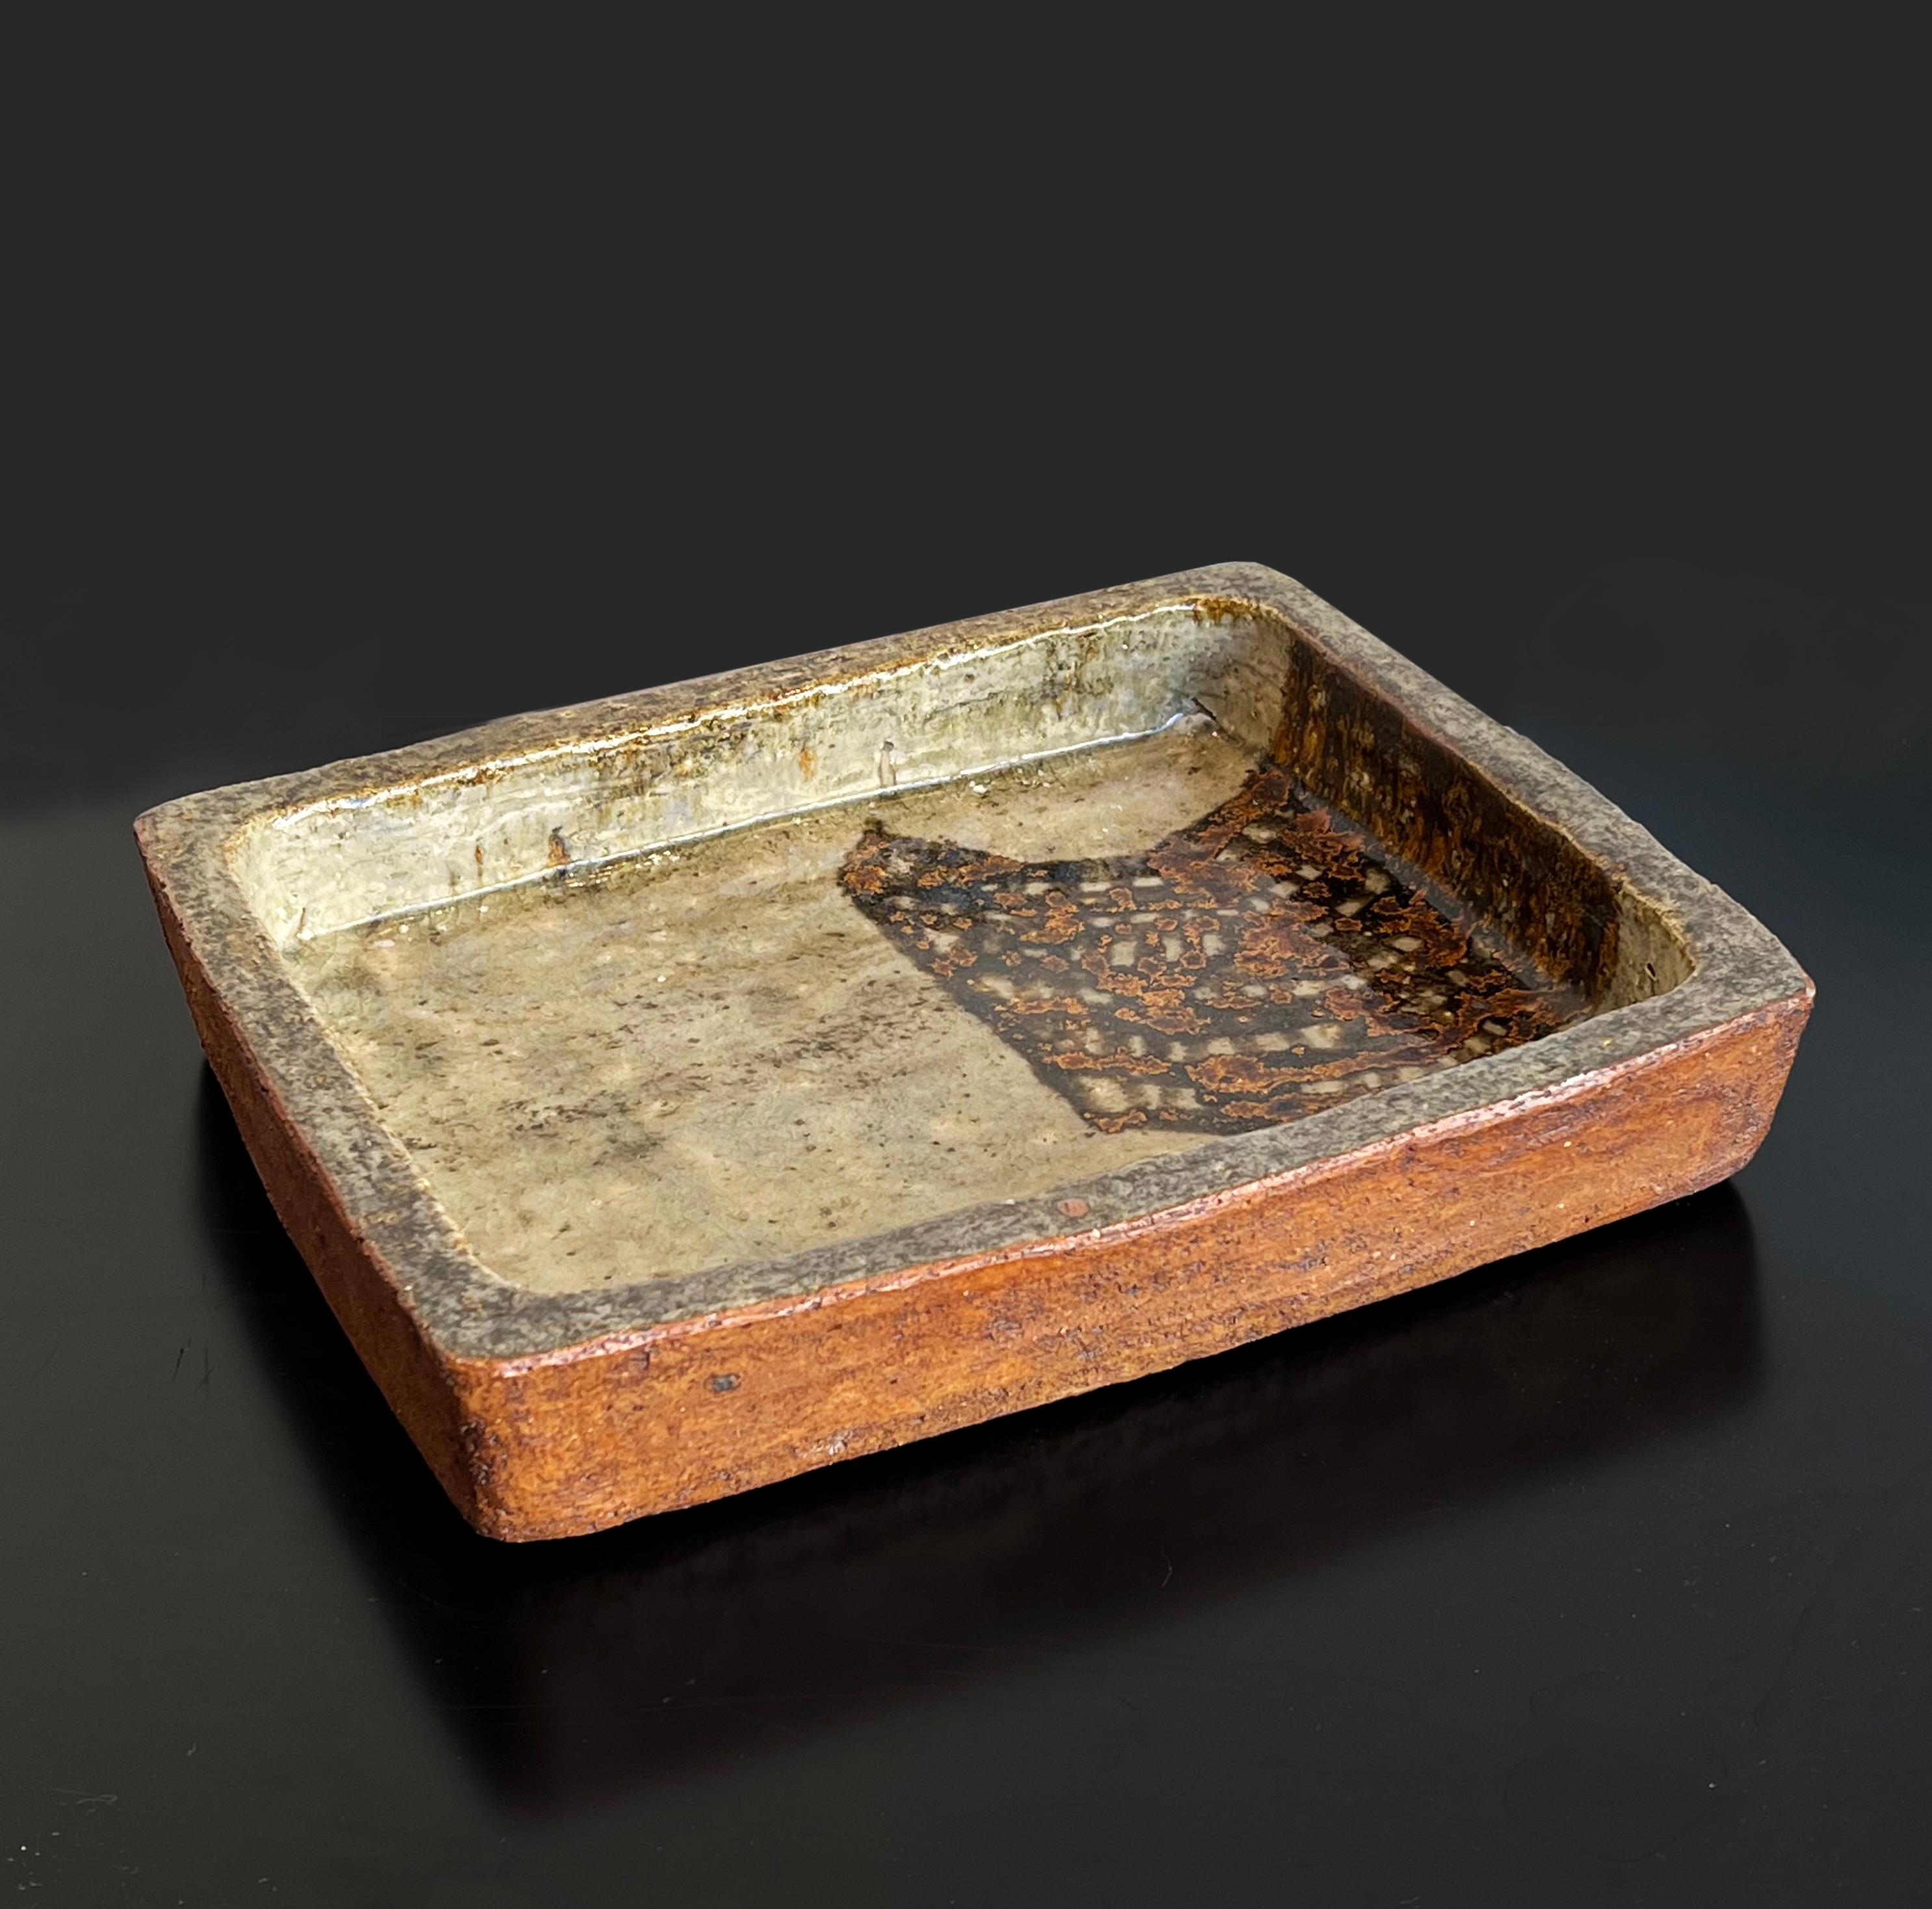 Glazed stoneware dish signed Conny Walther (1931-2020) Danish ceramist, circa 1960/70. Conny Walther learned the potter's trade in the large industrial ceramics factories while studying at the School of Decorative Arts in Copenhagen until 1951. She